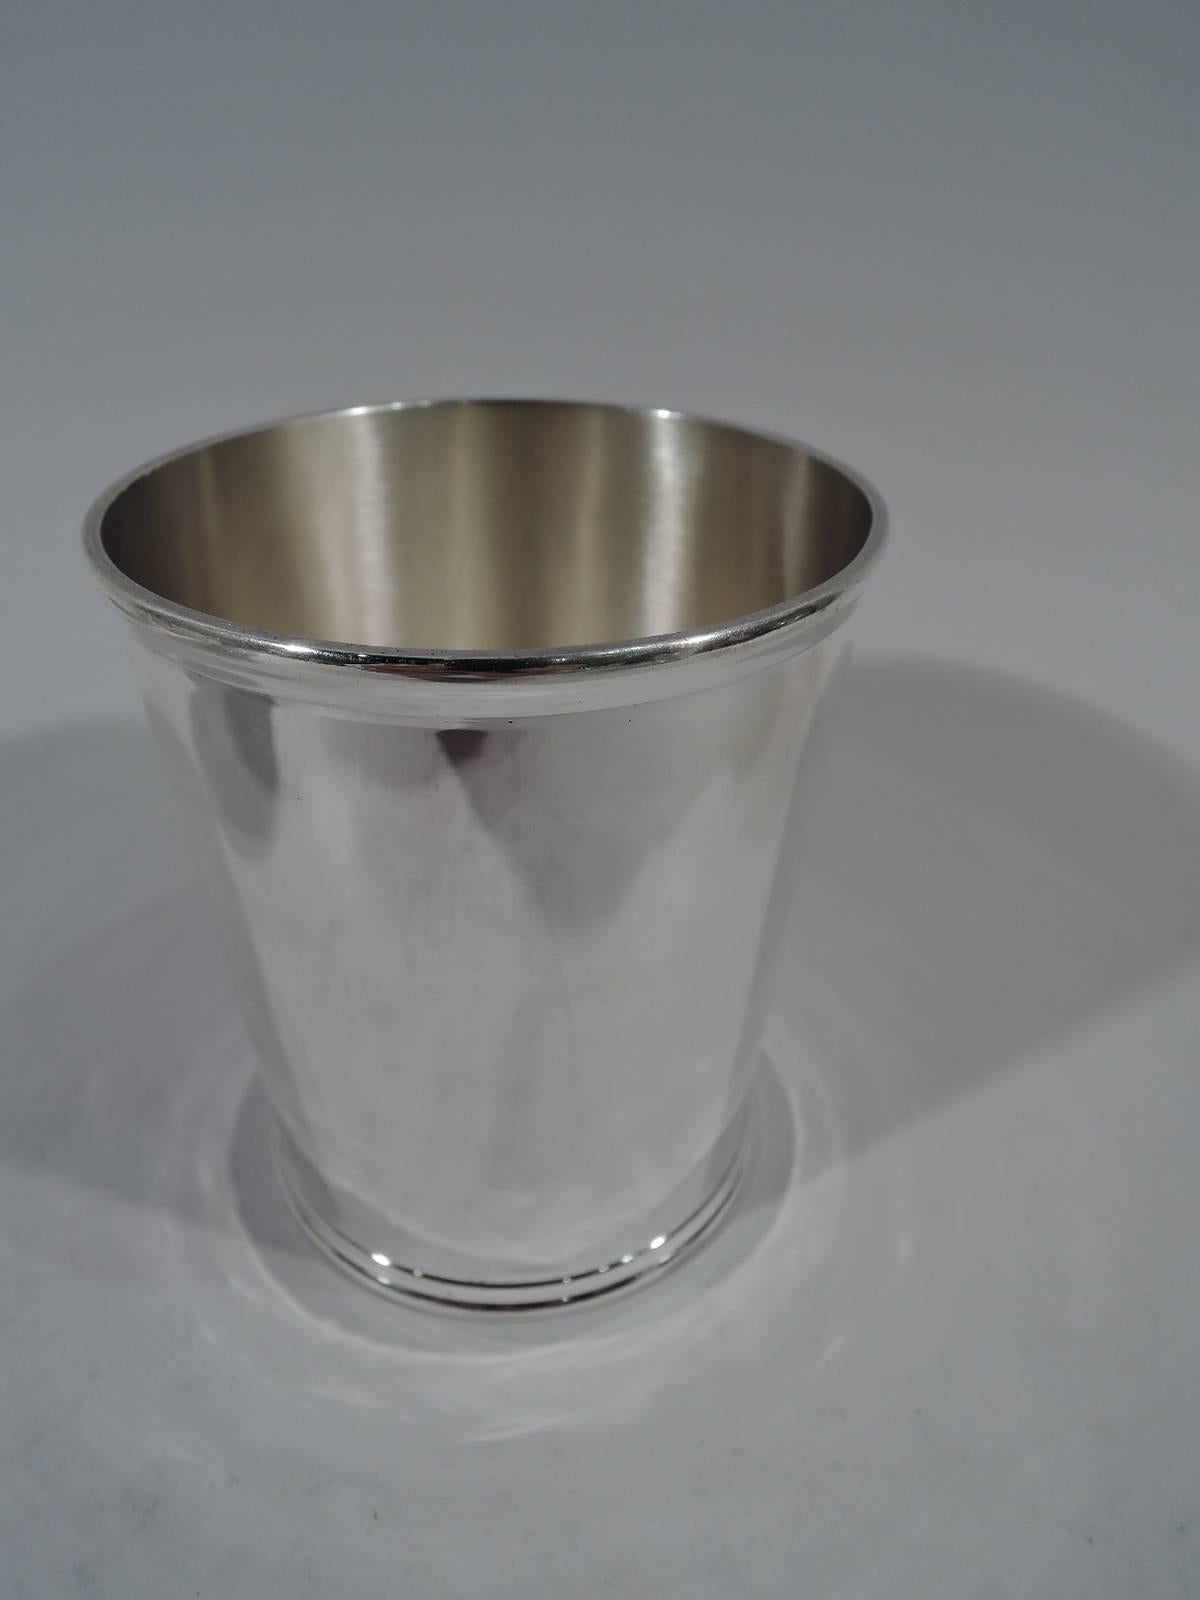 Set of six sterling silver mint julep cups. Made by Stieff in Baltimore in 1920. Each: Straight and tapering sides and molded rims. Nice and old, and fully serviceable for dozens more Derby days. Hallmark includes date symbol. Measure: Total weight